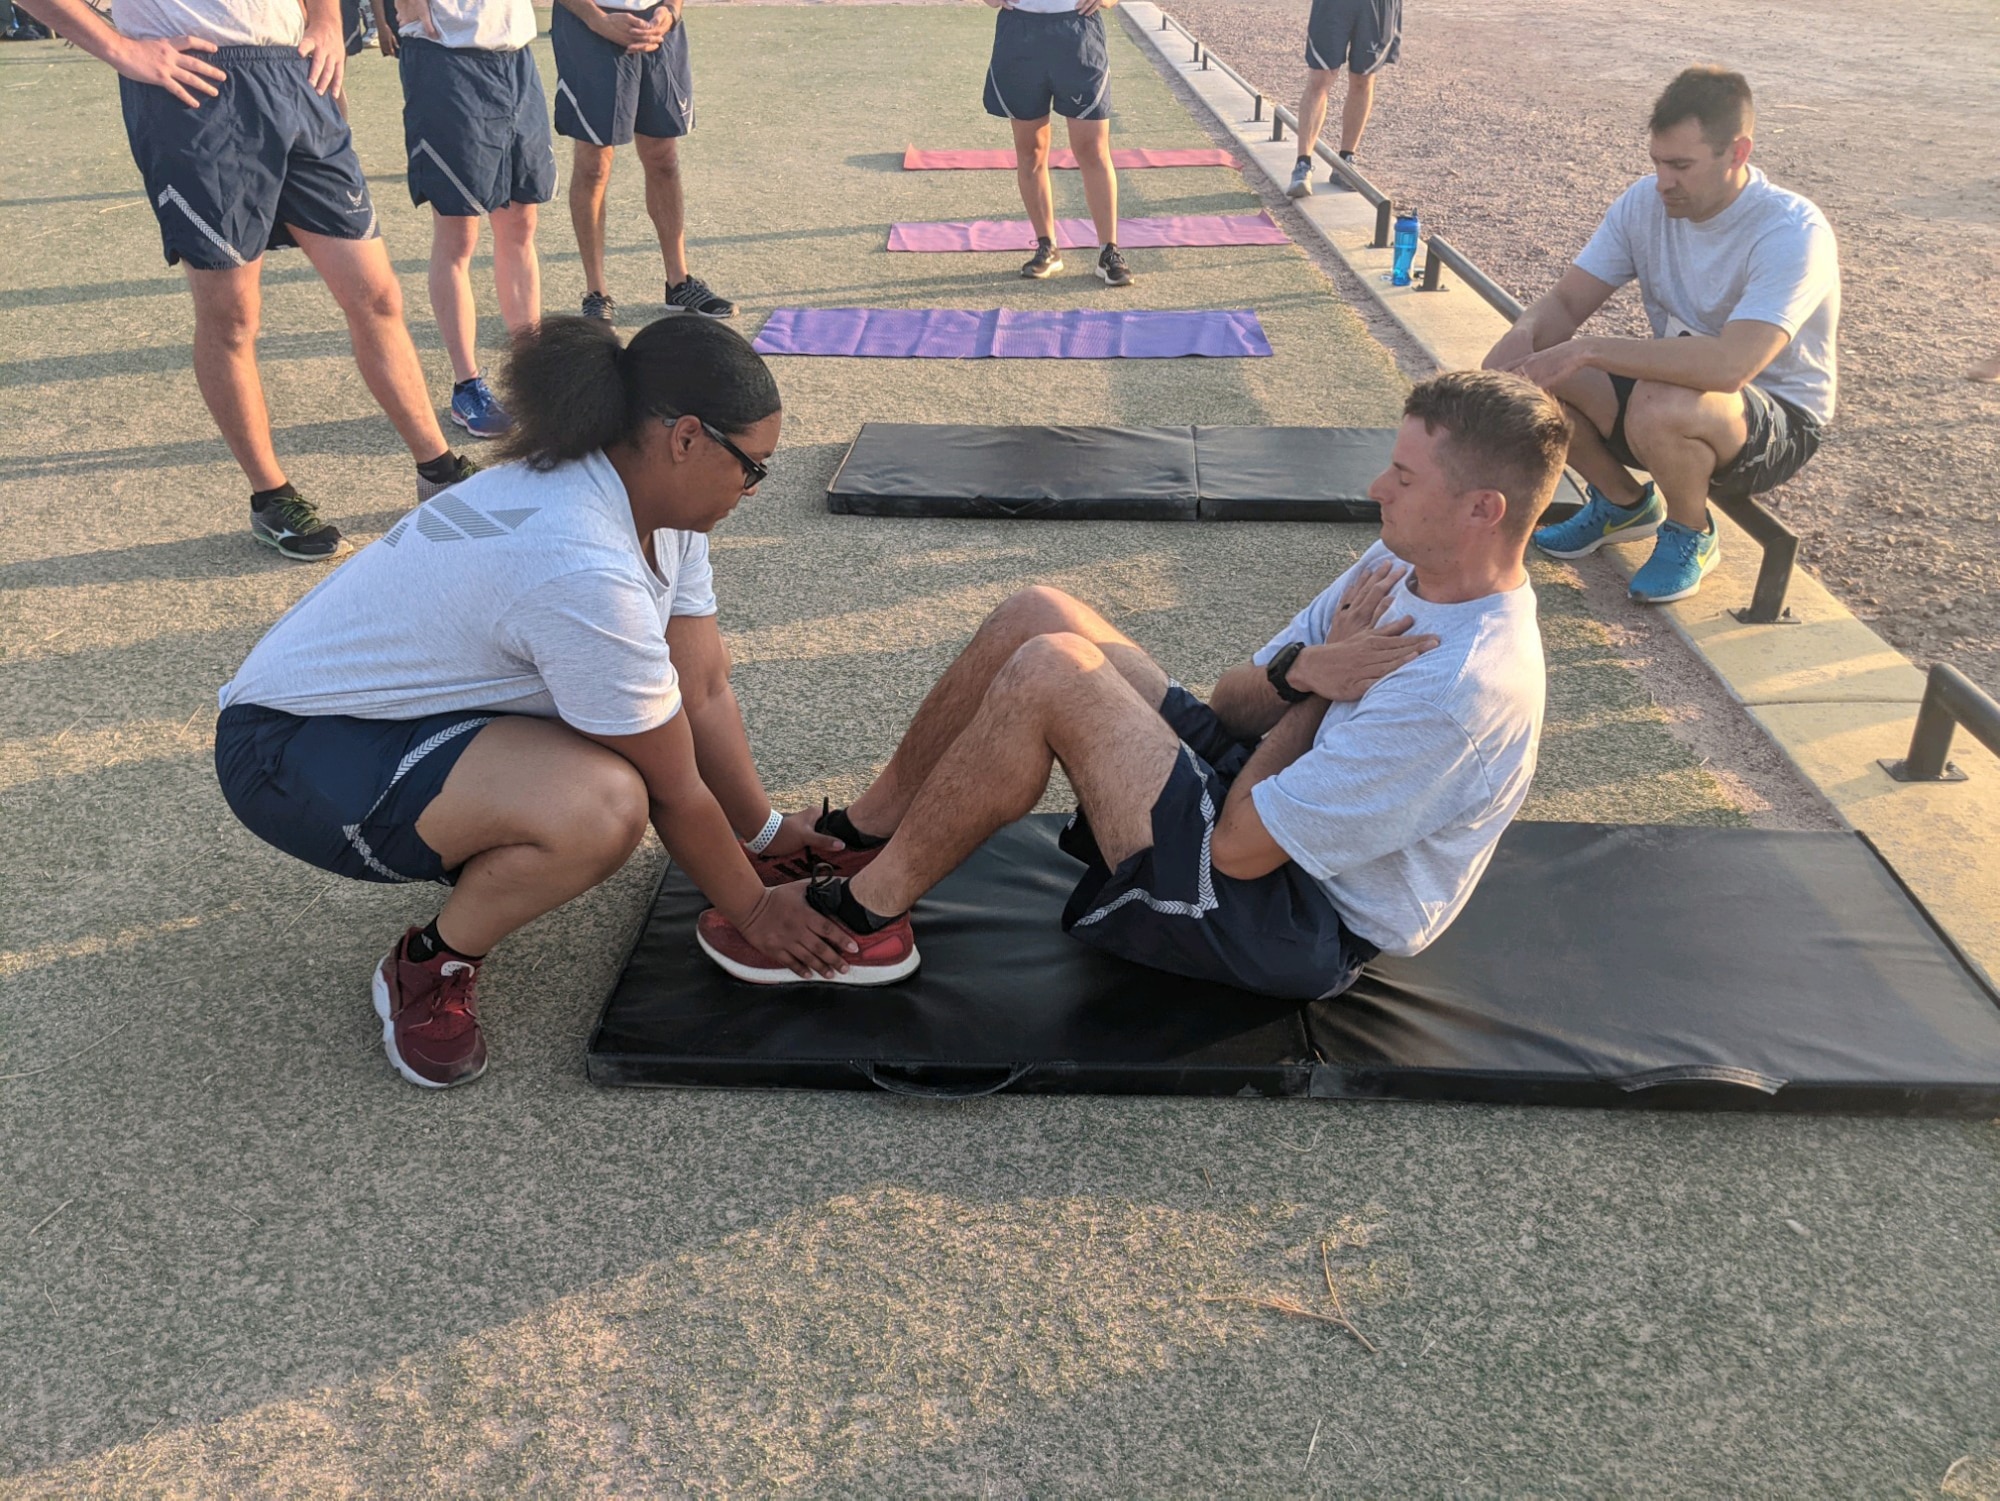 Tech. Sgt. Cody Christensen, 926th Force Support Squadron, performs a diagnostic physical fitness test, June 15, at Nellis Air Force Base, Nevada. (U.S. Air Force photo by Dan Mena)